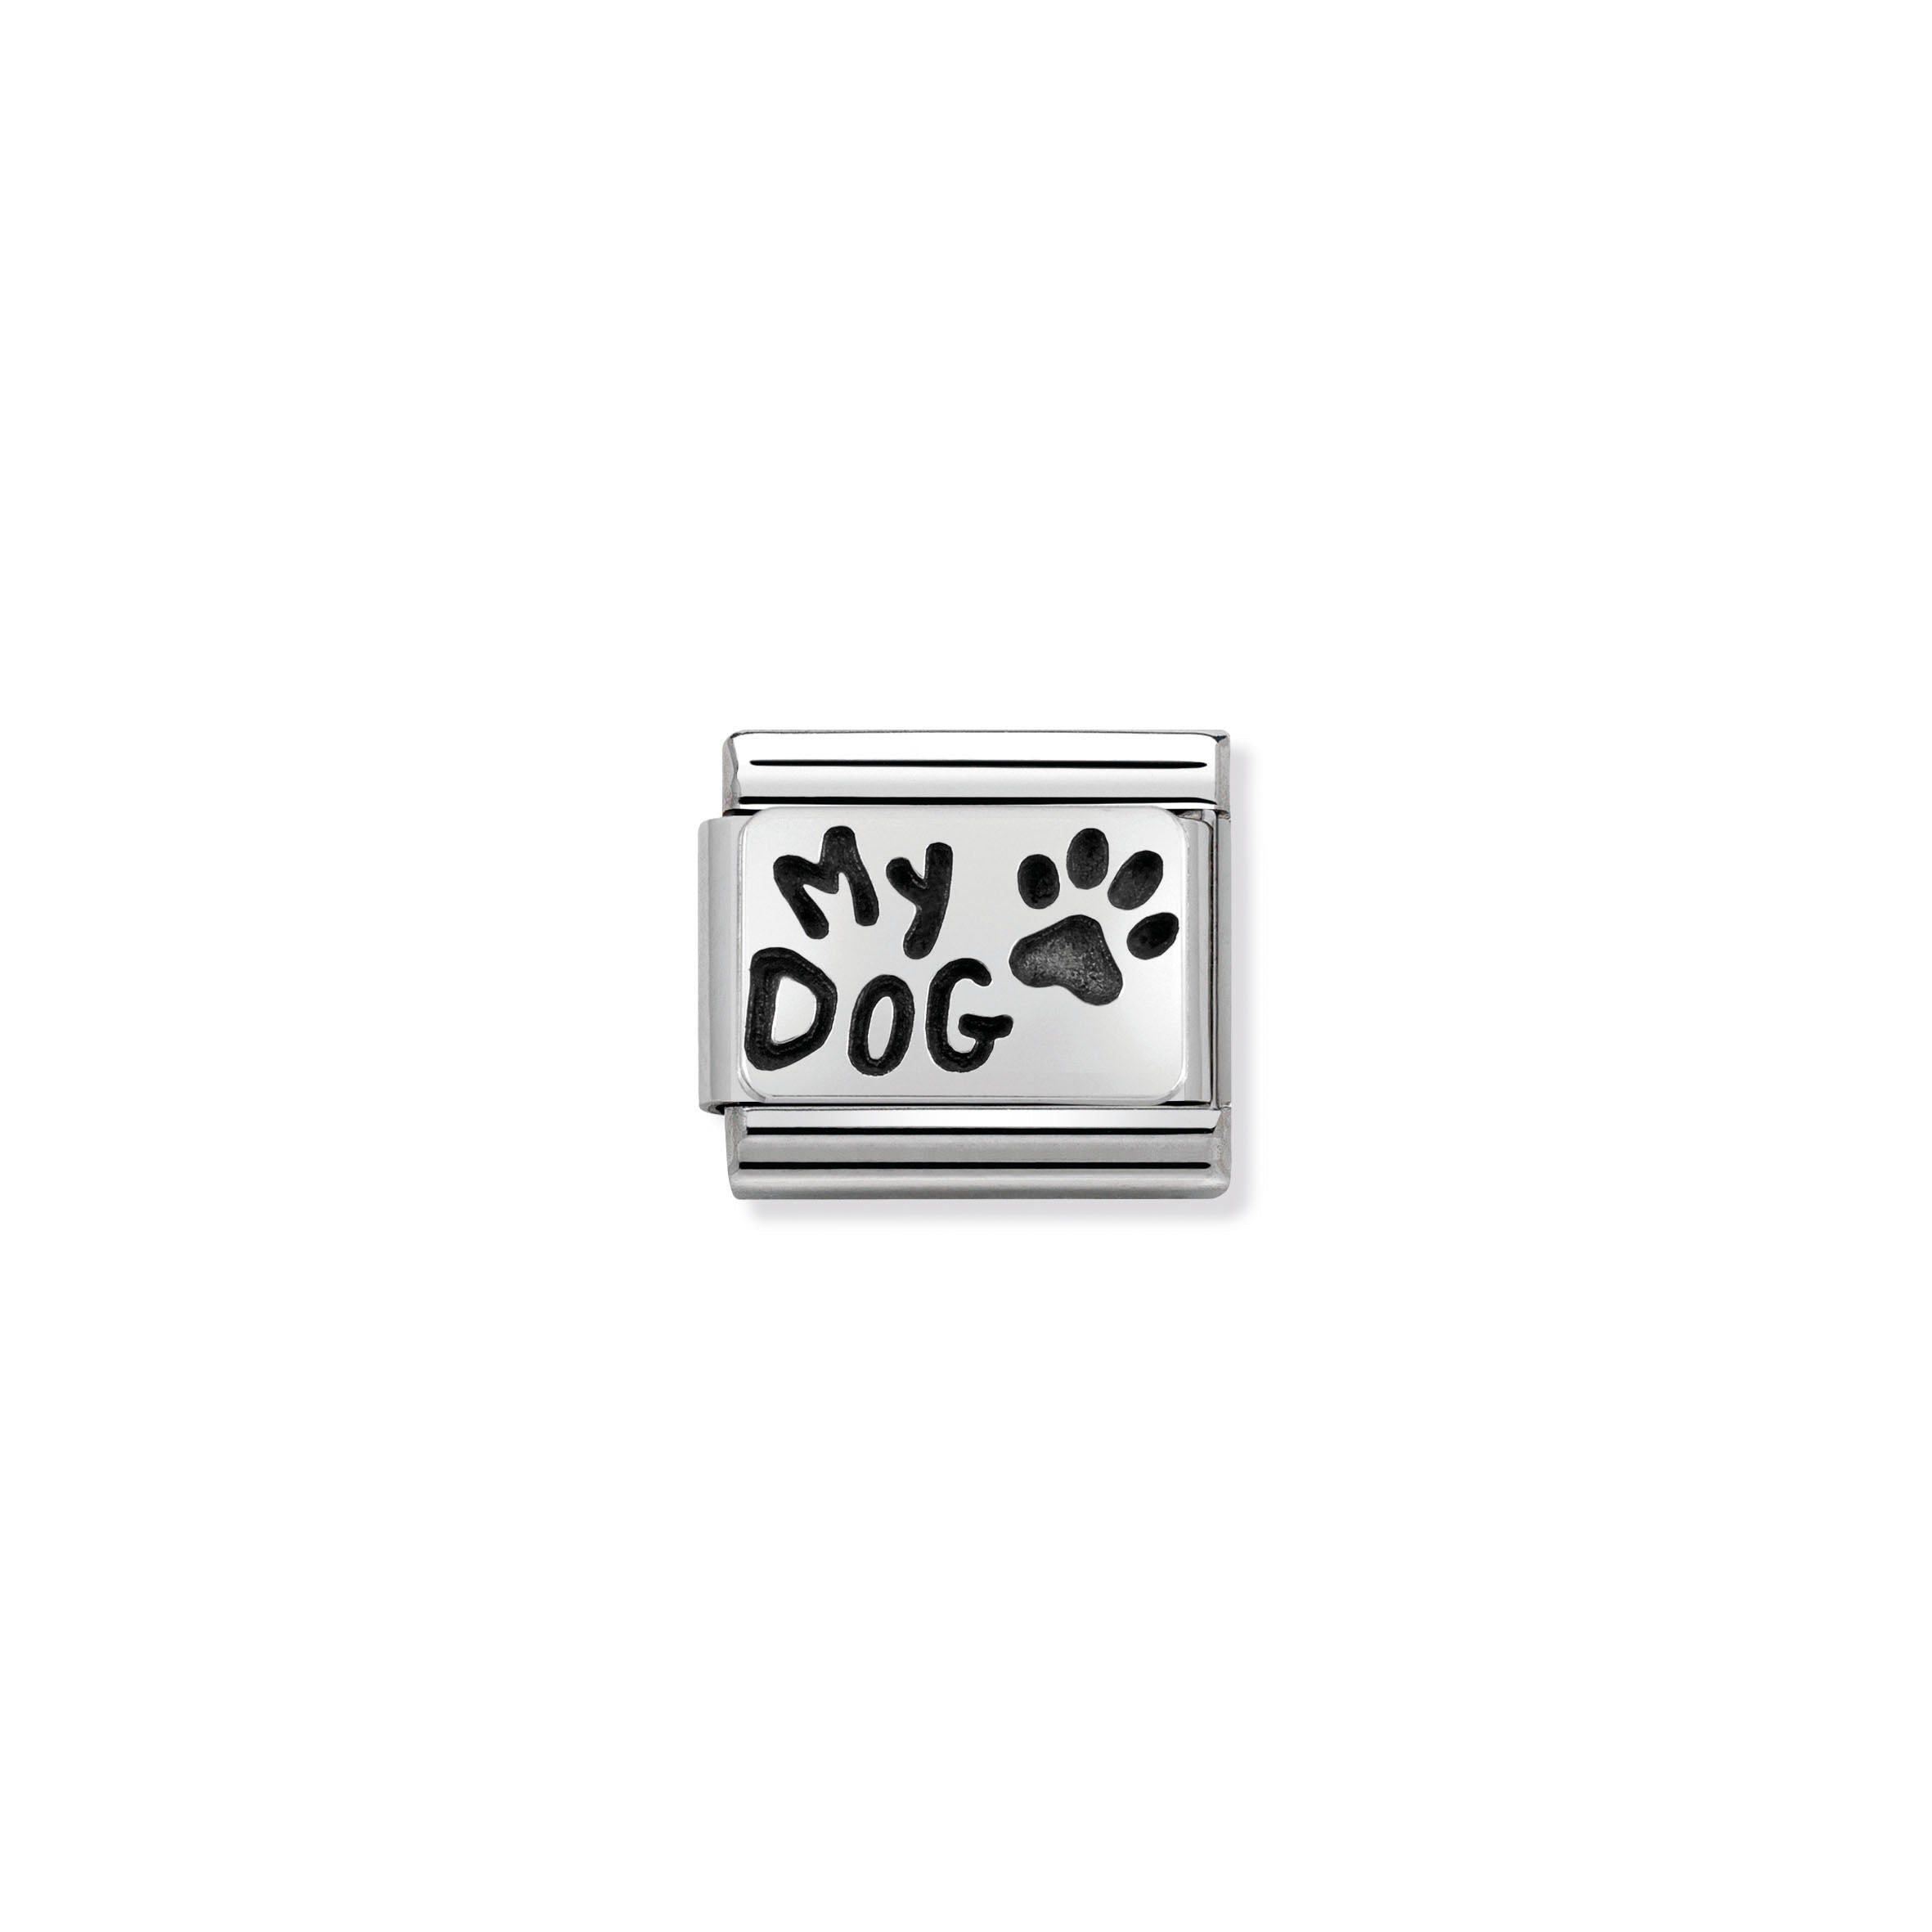 NOMINATION - Composable 330102 35 Classic PLATES OXIDISED st/steel & 925 silver (My Dog)